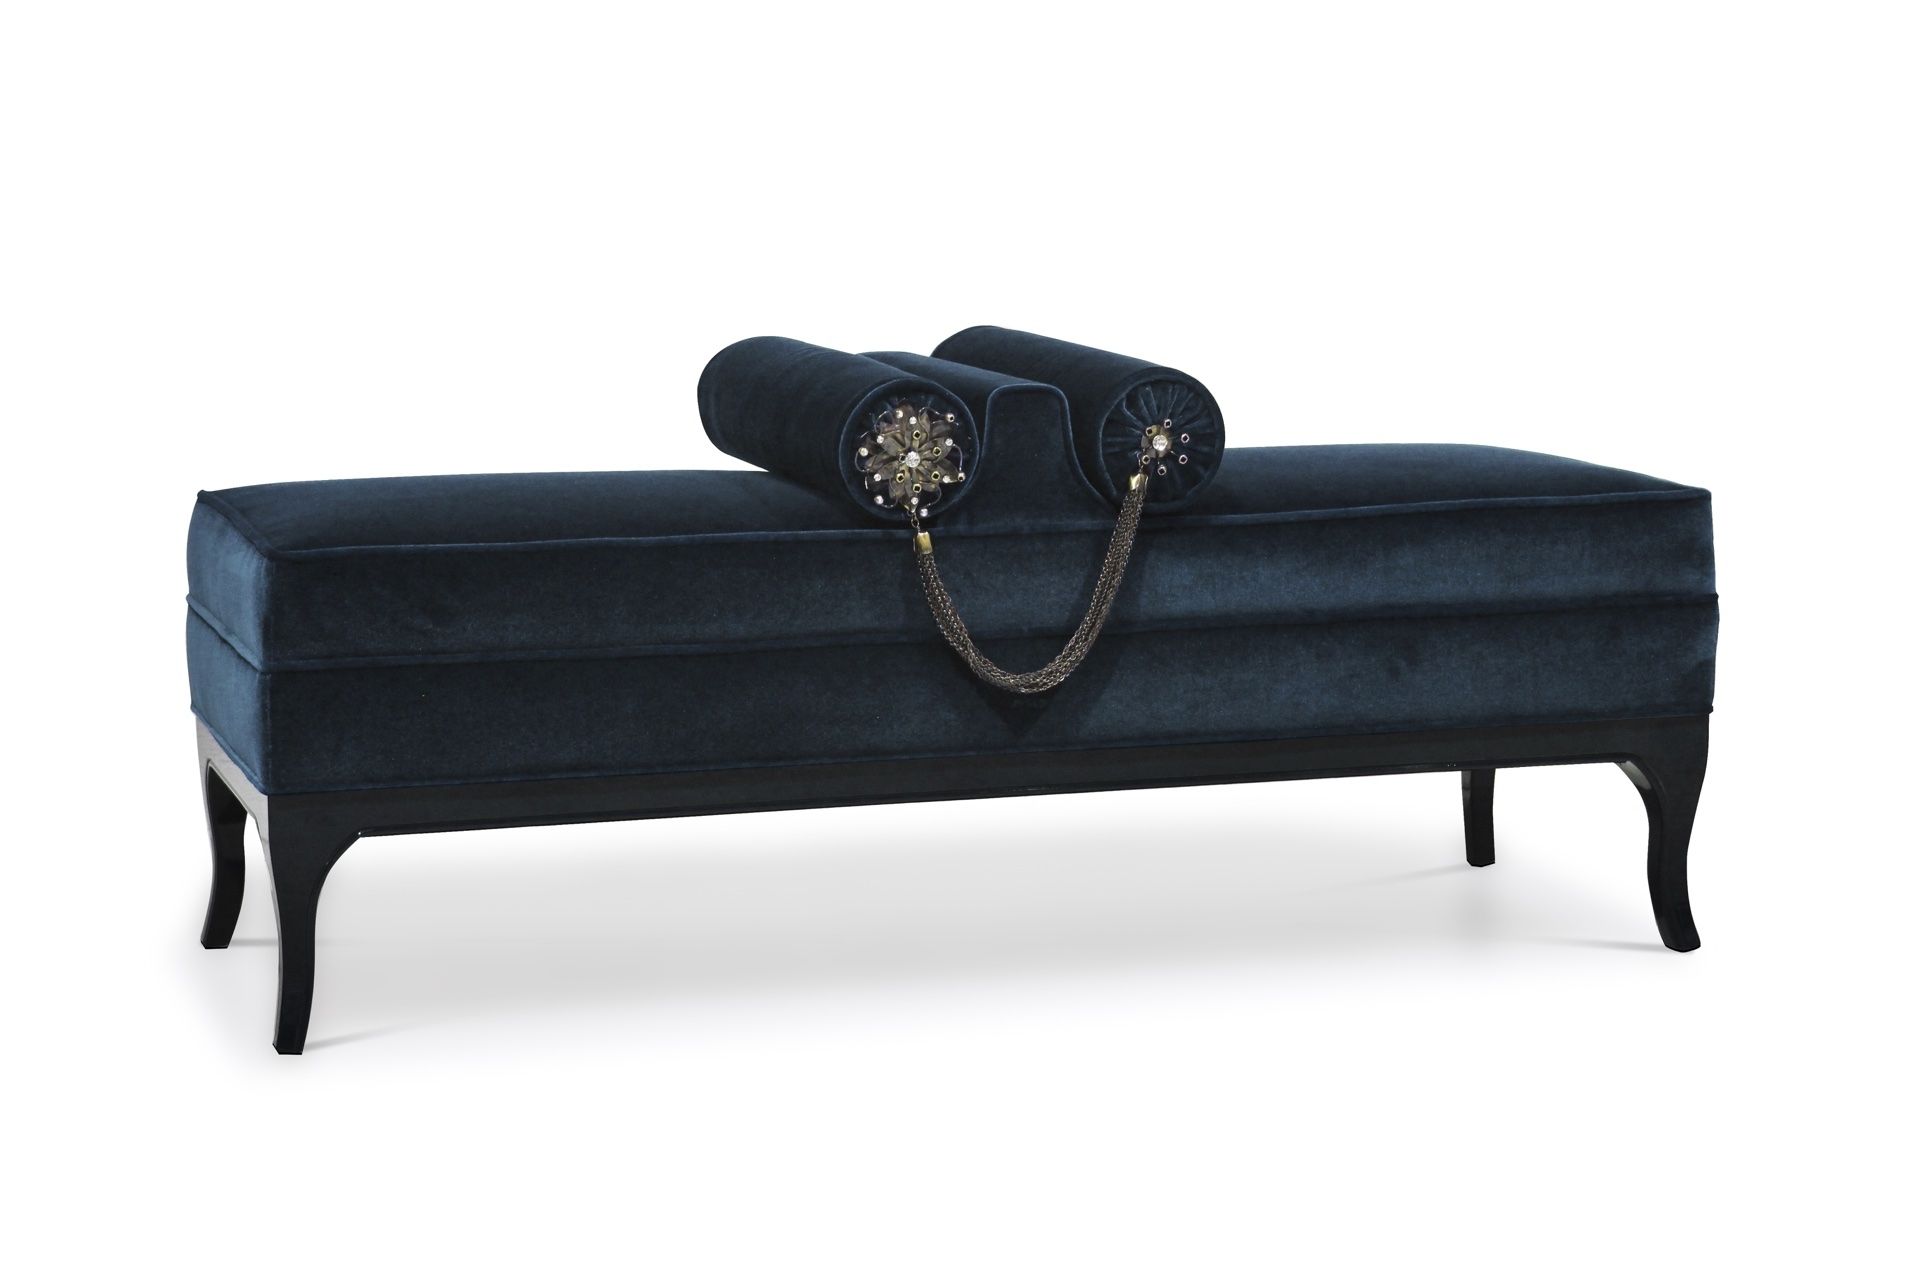 Chaise Benchs Pertaining To Fashionable The Best Benches And Chaises For Your Home Decor (View 8 of 15)